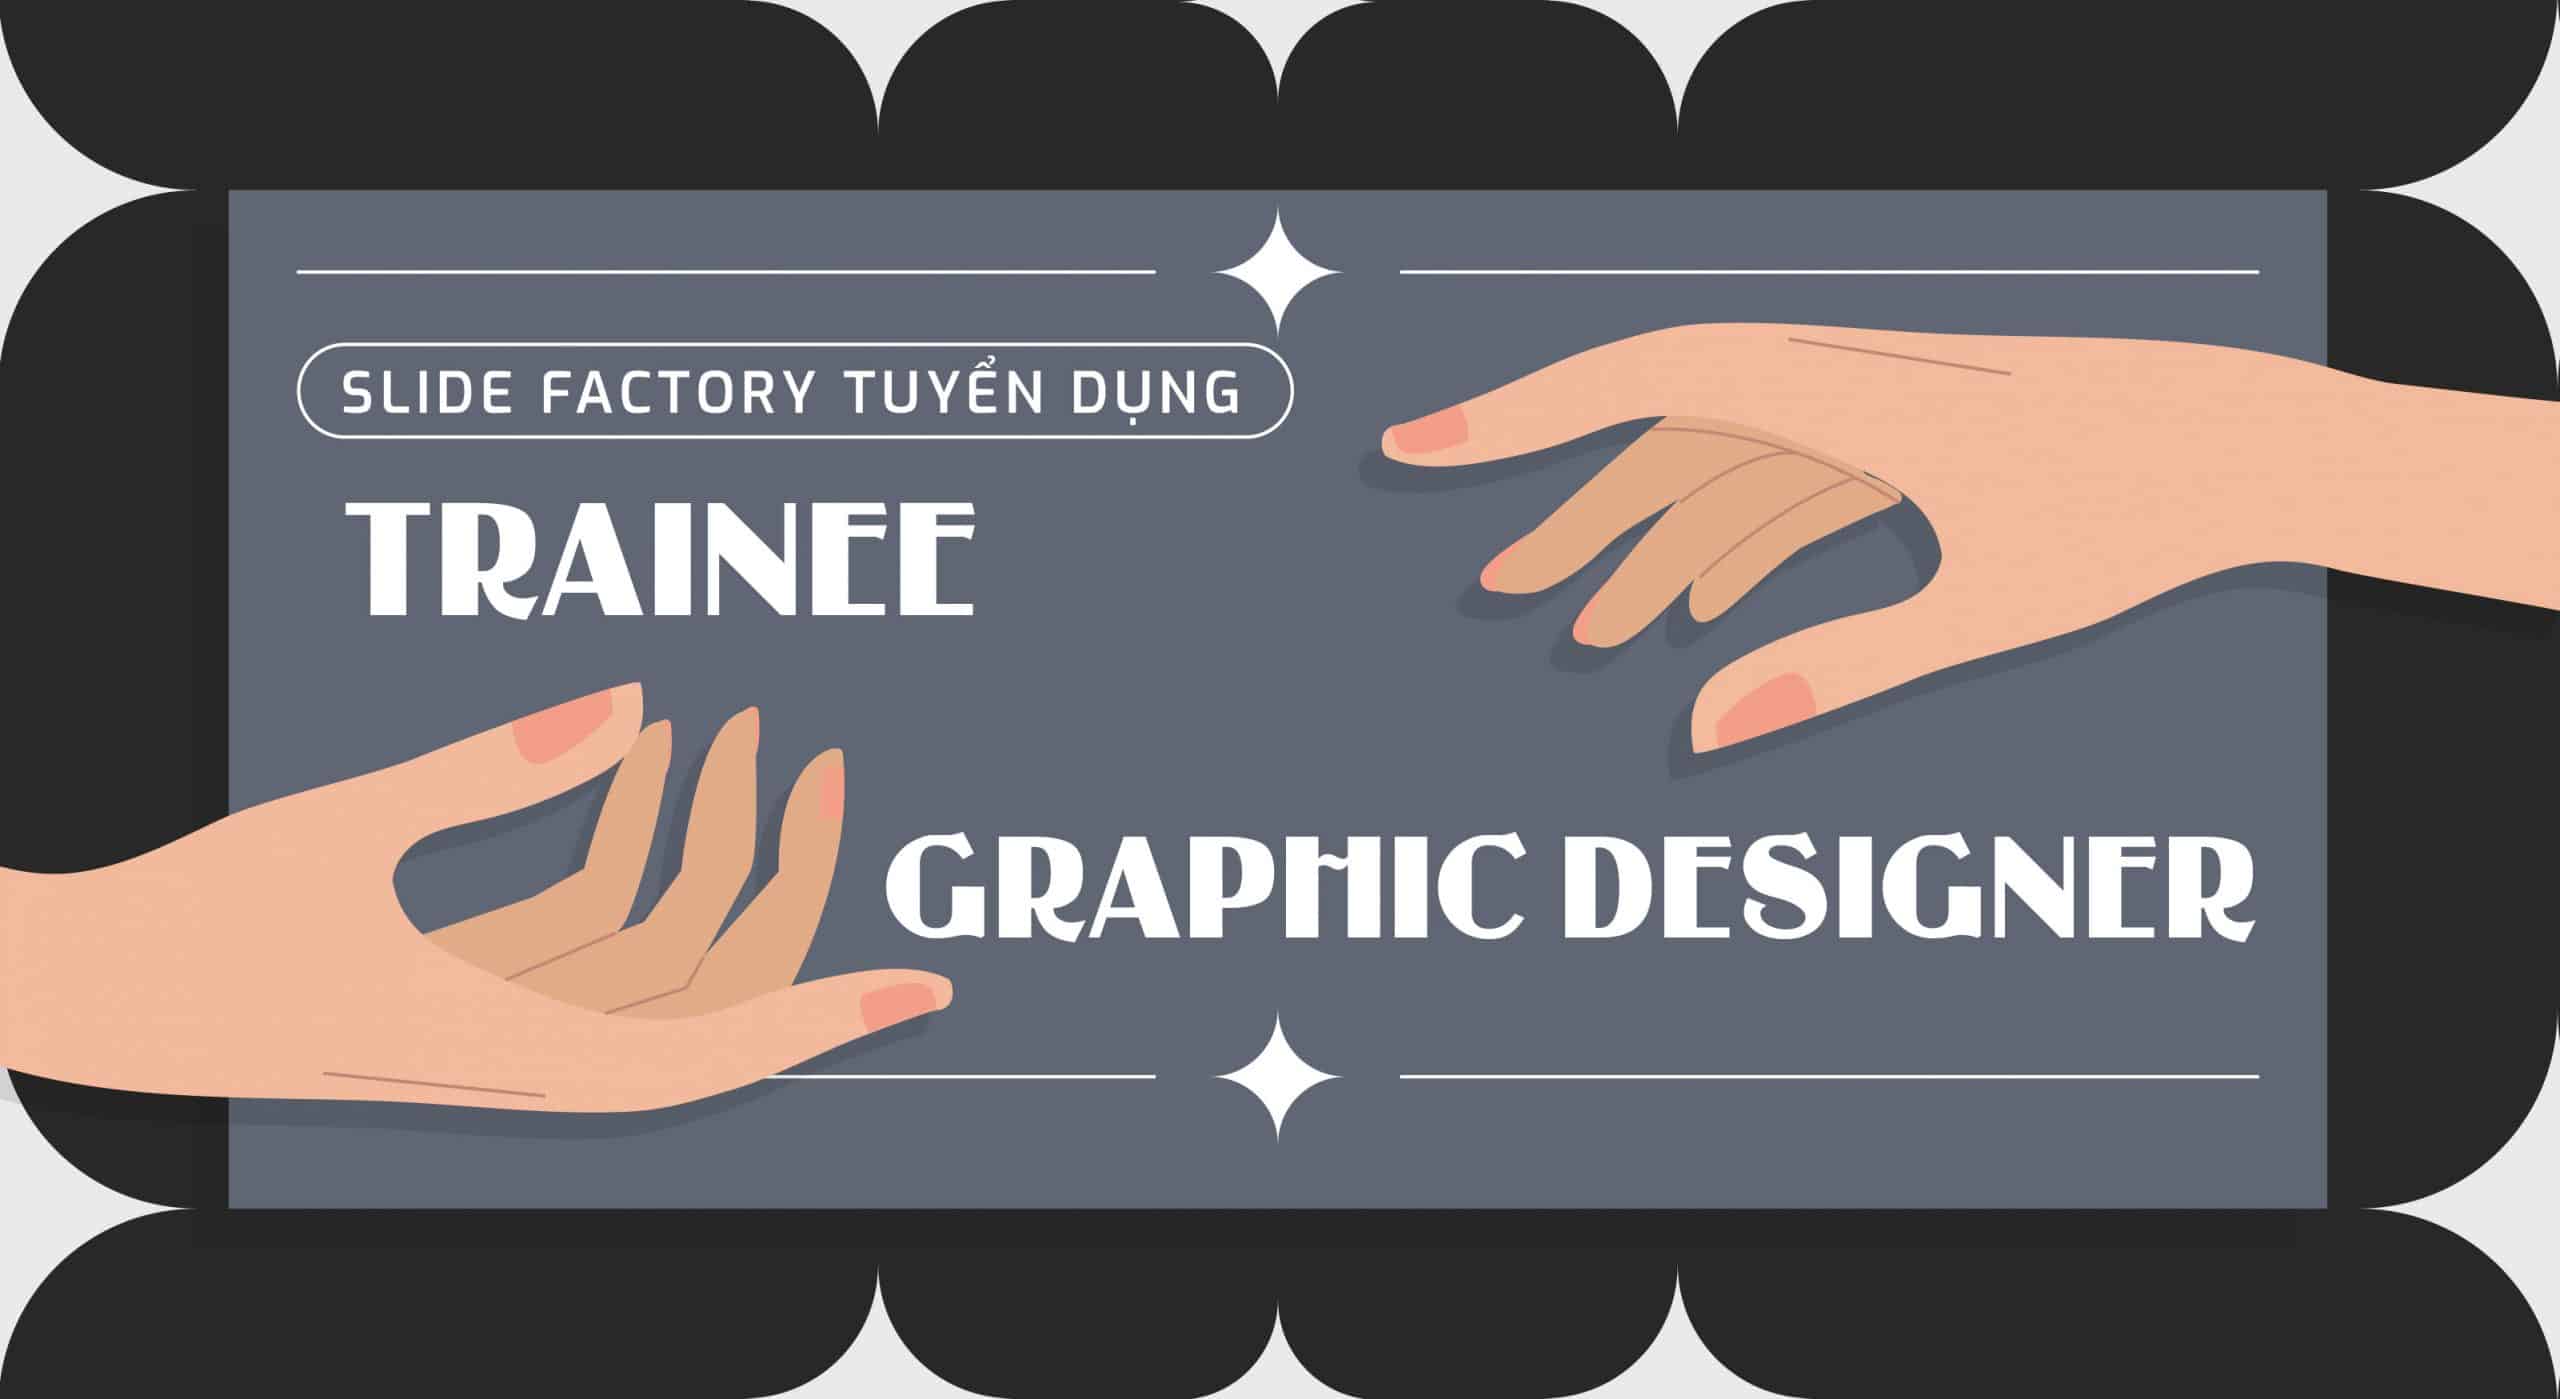 SLIDE FACTORY tuyển dụng Trainee Graphic Designer (Part-time)